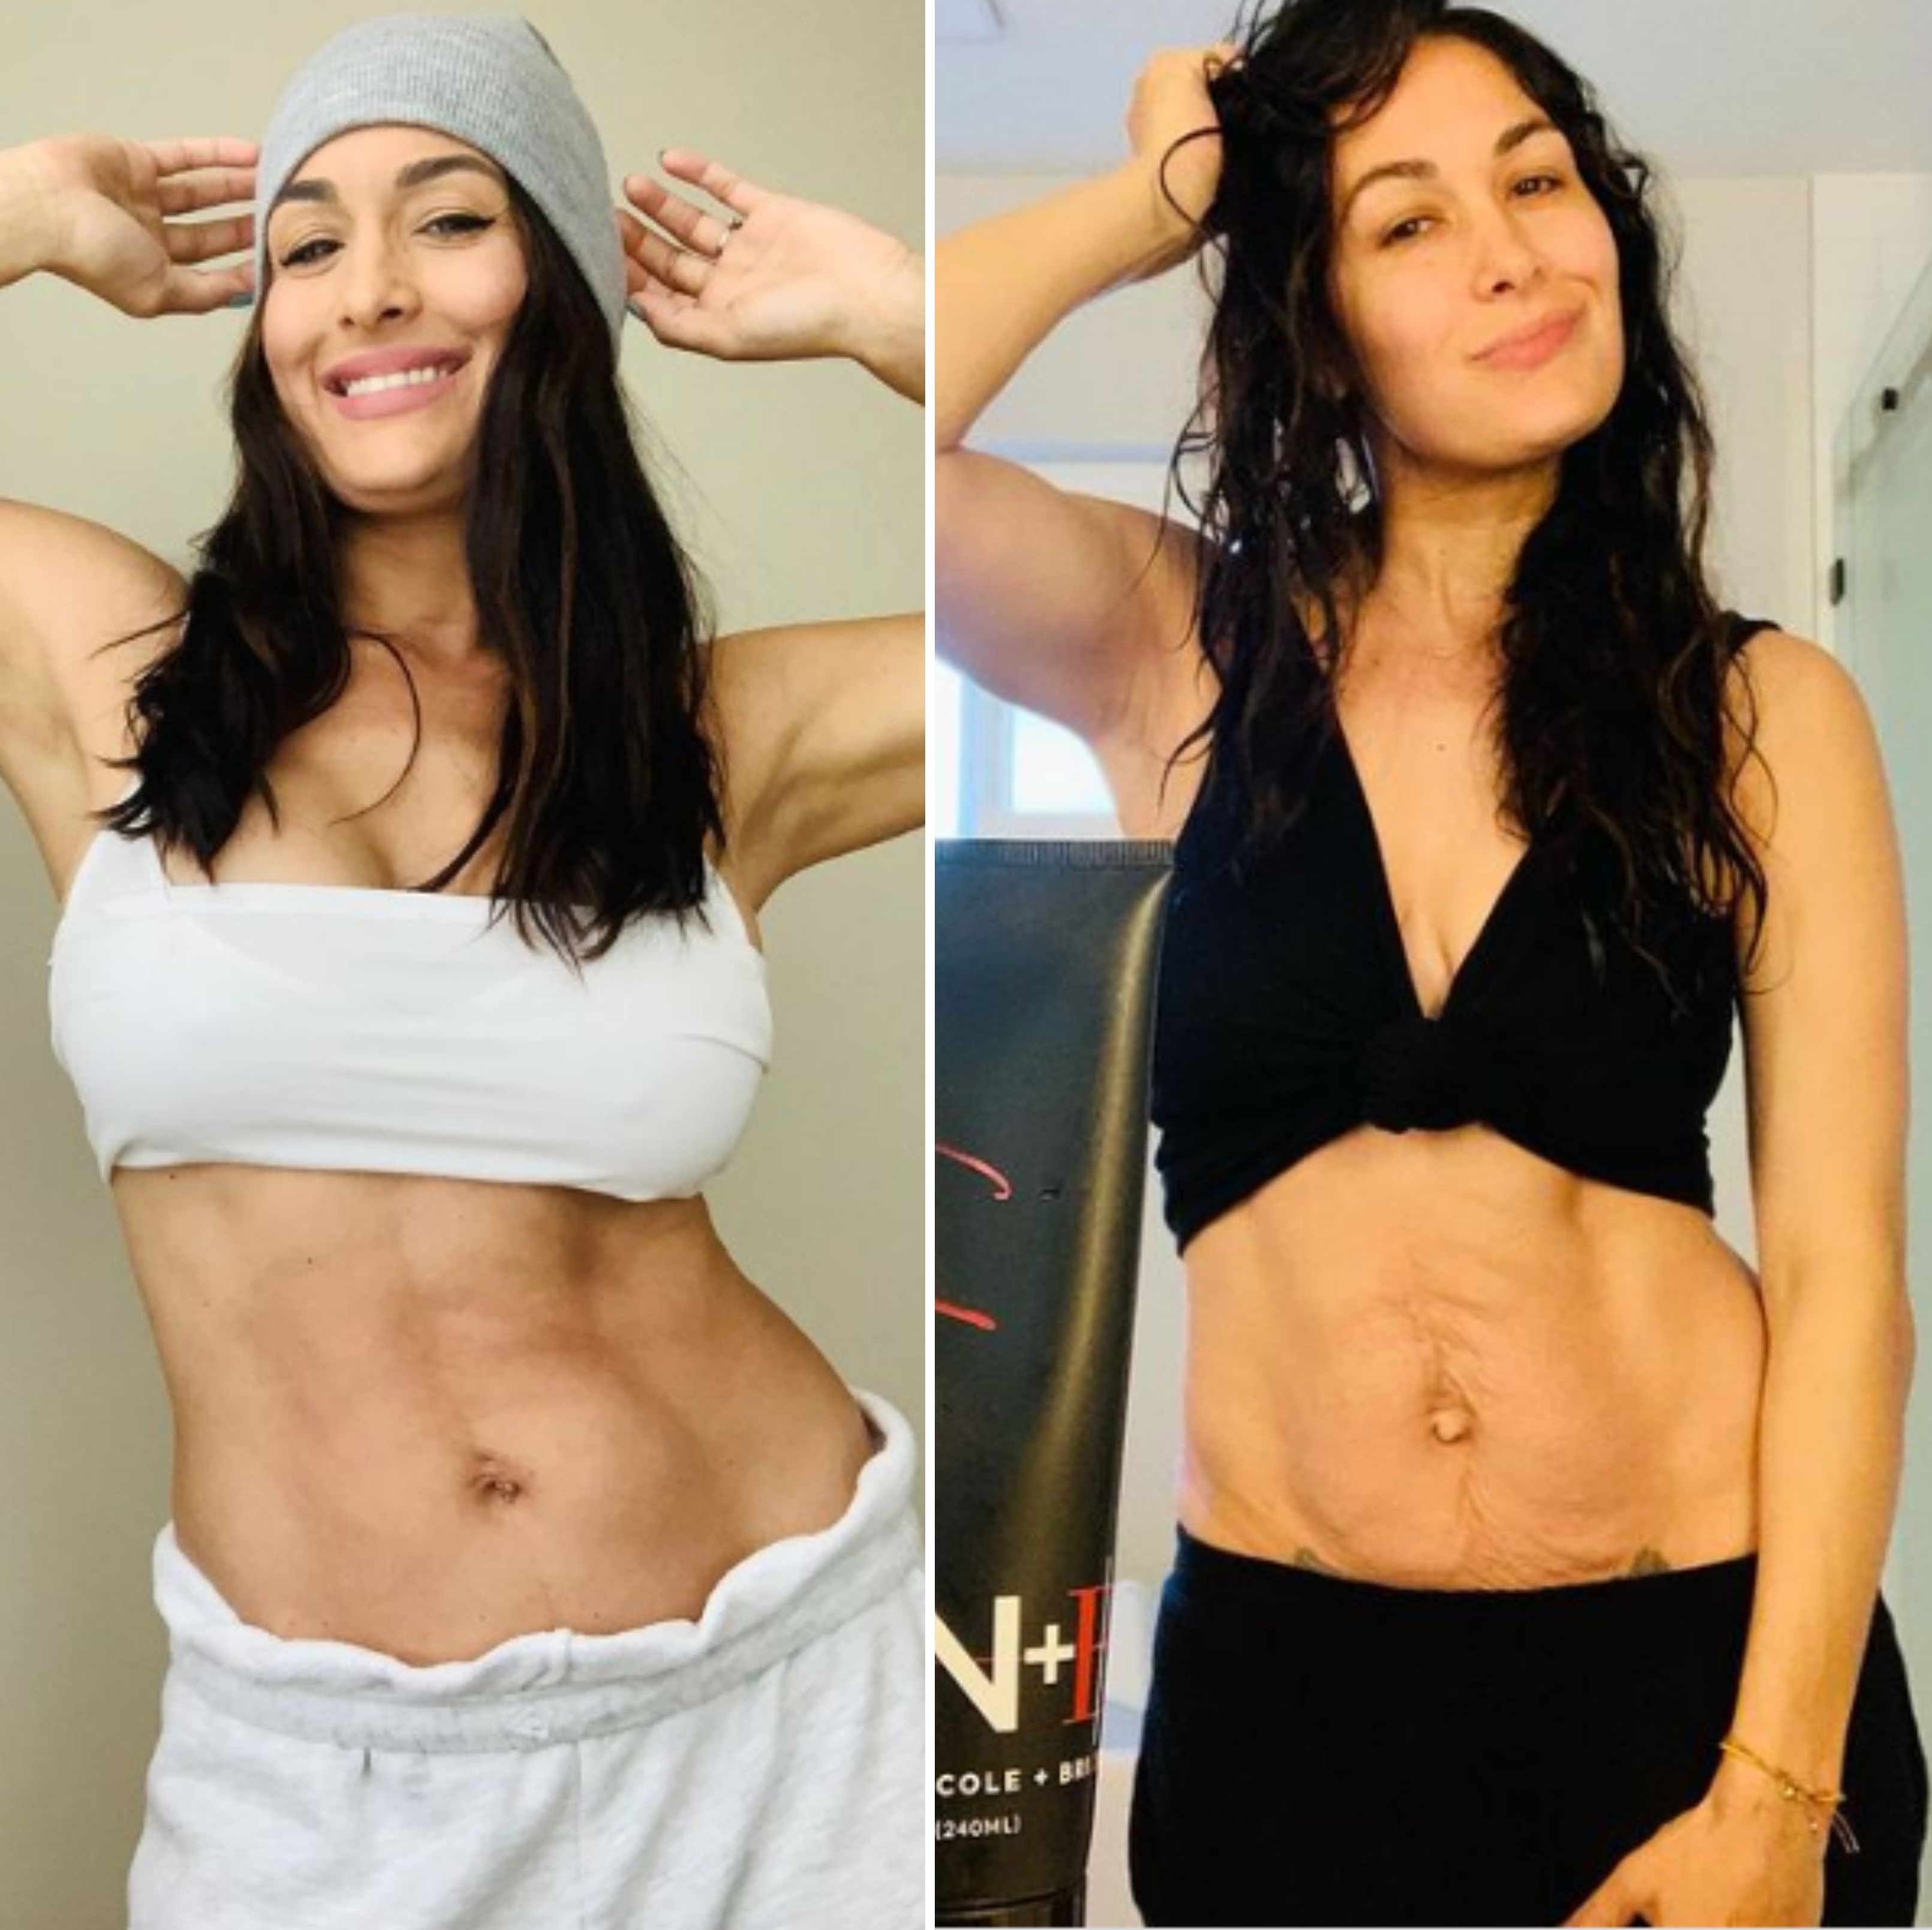 Brie Bella Shares Empowering Pic Of Her Body 9 Months Post-Baby